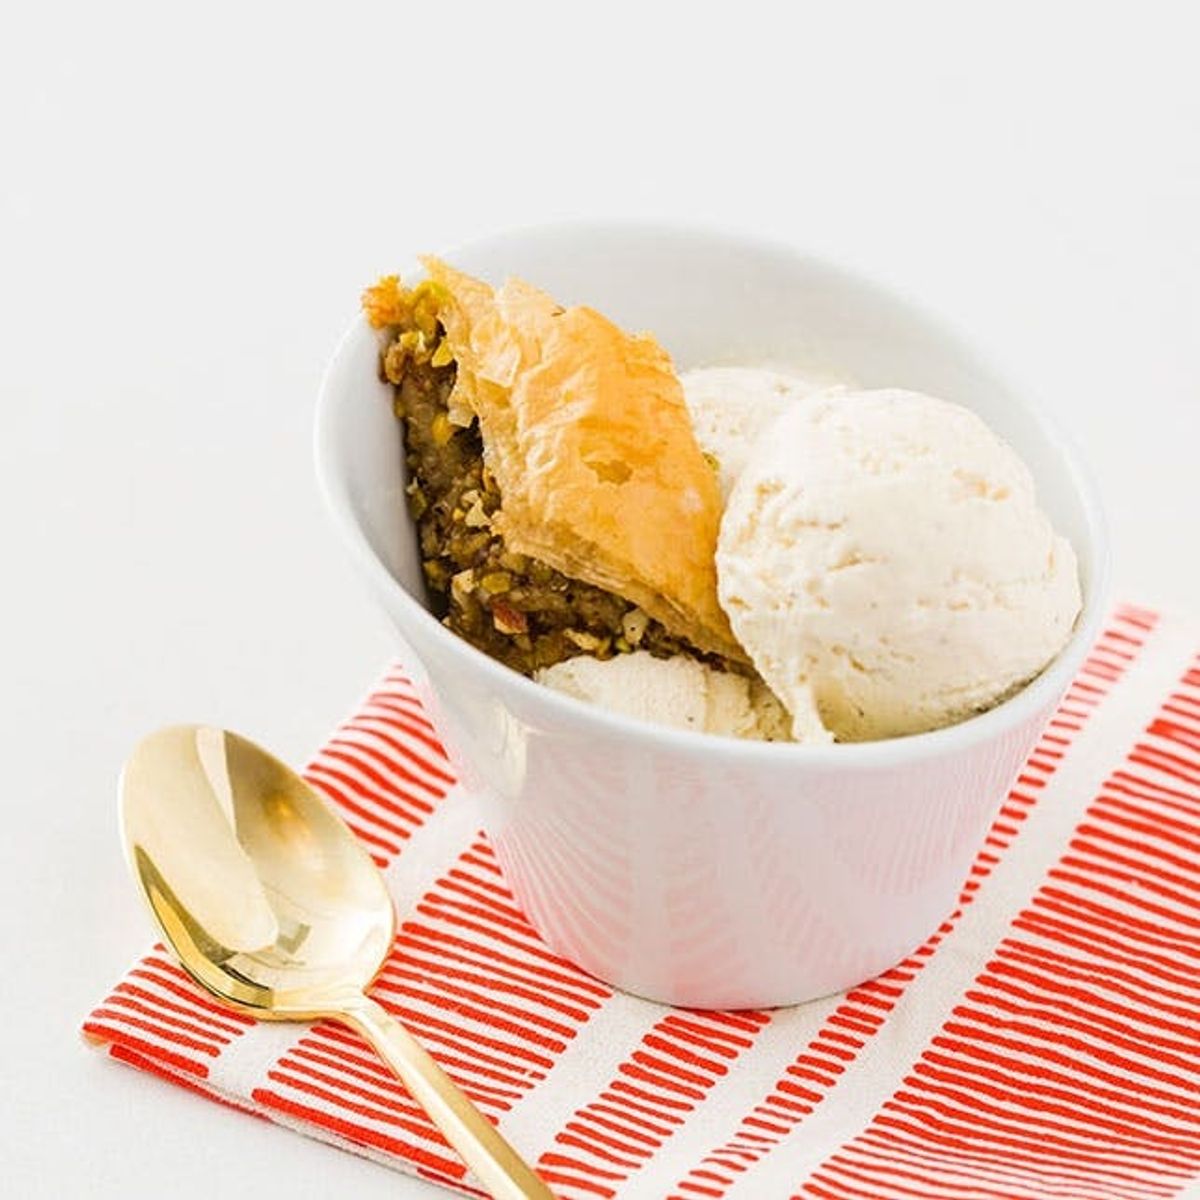 This Chippy Baklava Will Turn You into a Bak-Lover